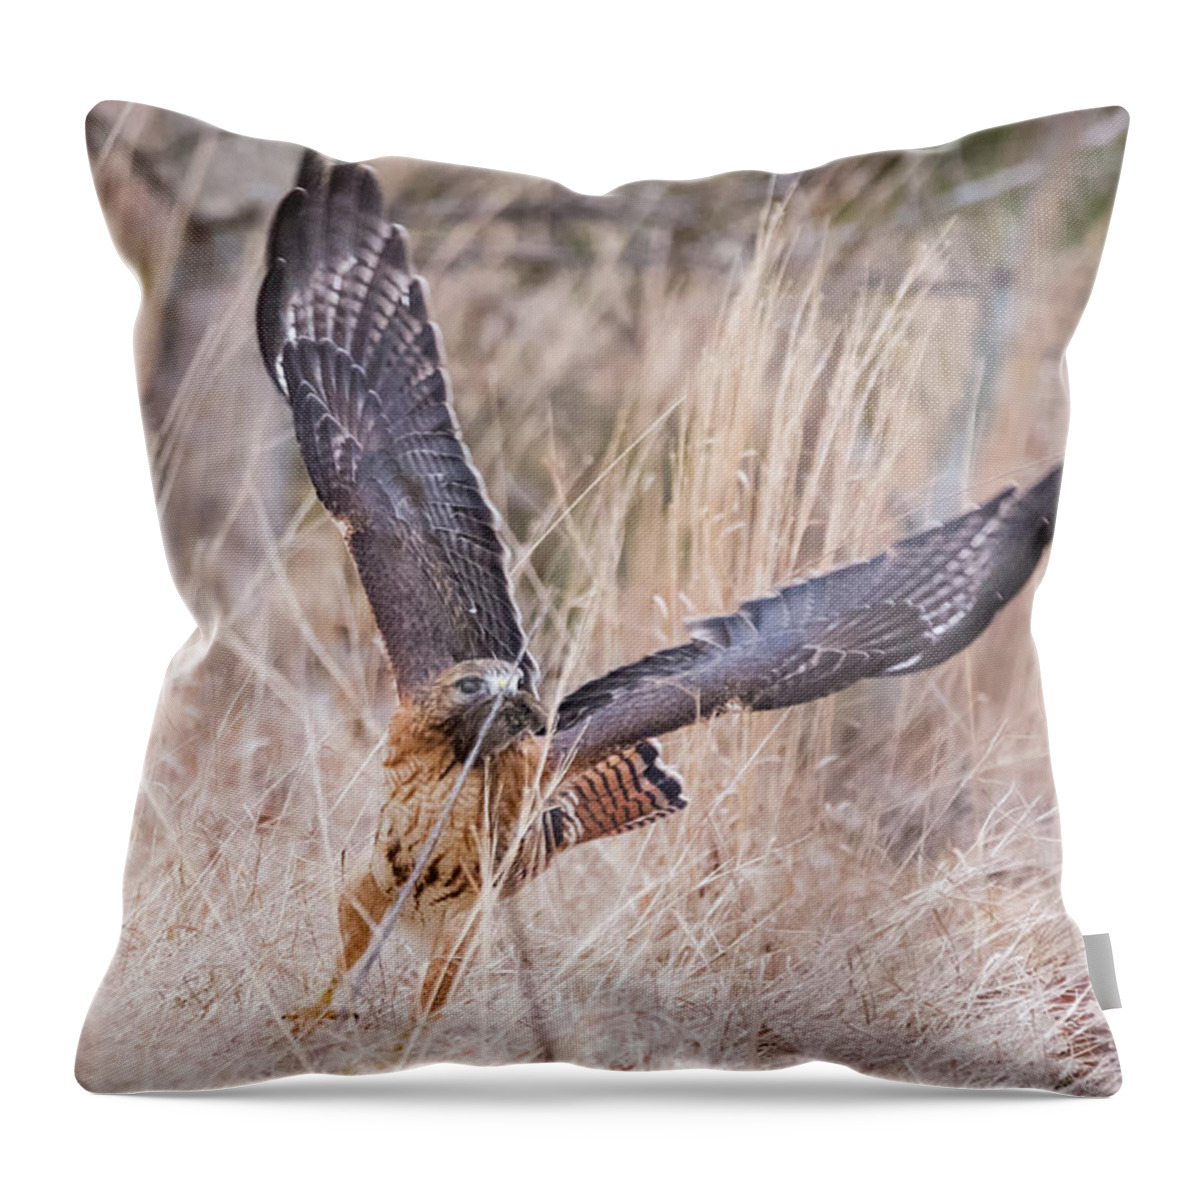 Hal Hybrid Hawk Redtail Redshould Redshouldered Red-shoulder Red-tail X Bird Hunting Vole Catch Feeding Rare Ornithology Outside Outdoors Natural Wild Wildlife Nature Prey Boylston West W Westboylston Ma Mass Massachusetts Brian Hale Brianhalephoto Newengland New England Throw Pillow featuring the photograph Hal picking up dinner by Brian Hale